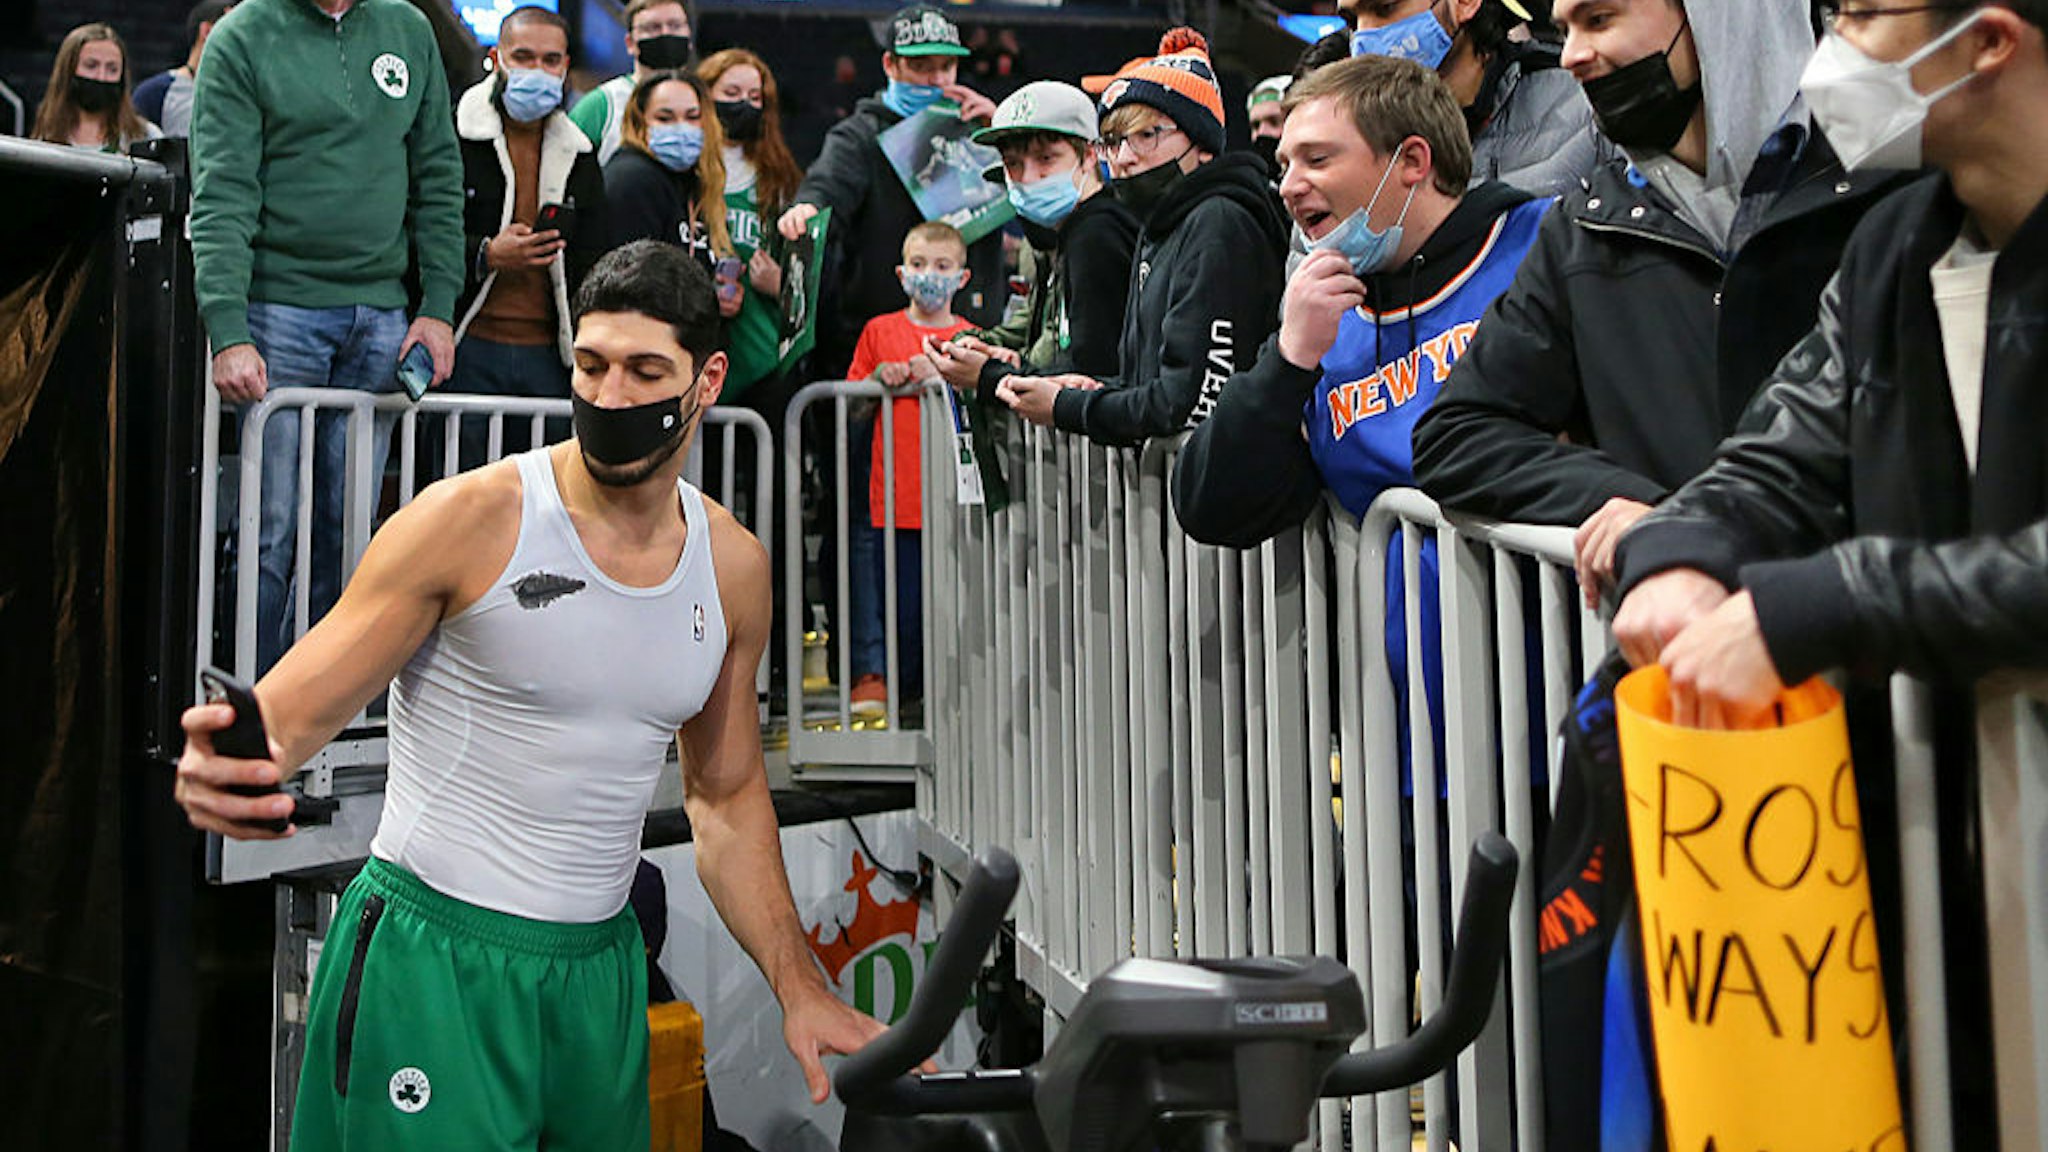 Boston - December 18: Boston Celtics Enes Kanter Freedom takes a selfie with Knicks fans before he went to visit the locker room before the game. The Boston Celtics host the New York Knicks in an NBA game at TD Garden in Boston on Dec. 18, 2021. (Photo by John Tlumacki/The Boston Globe via Getty Images)